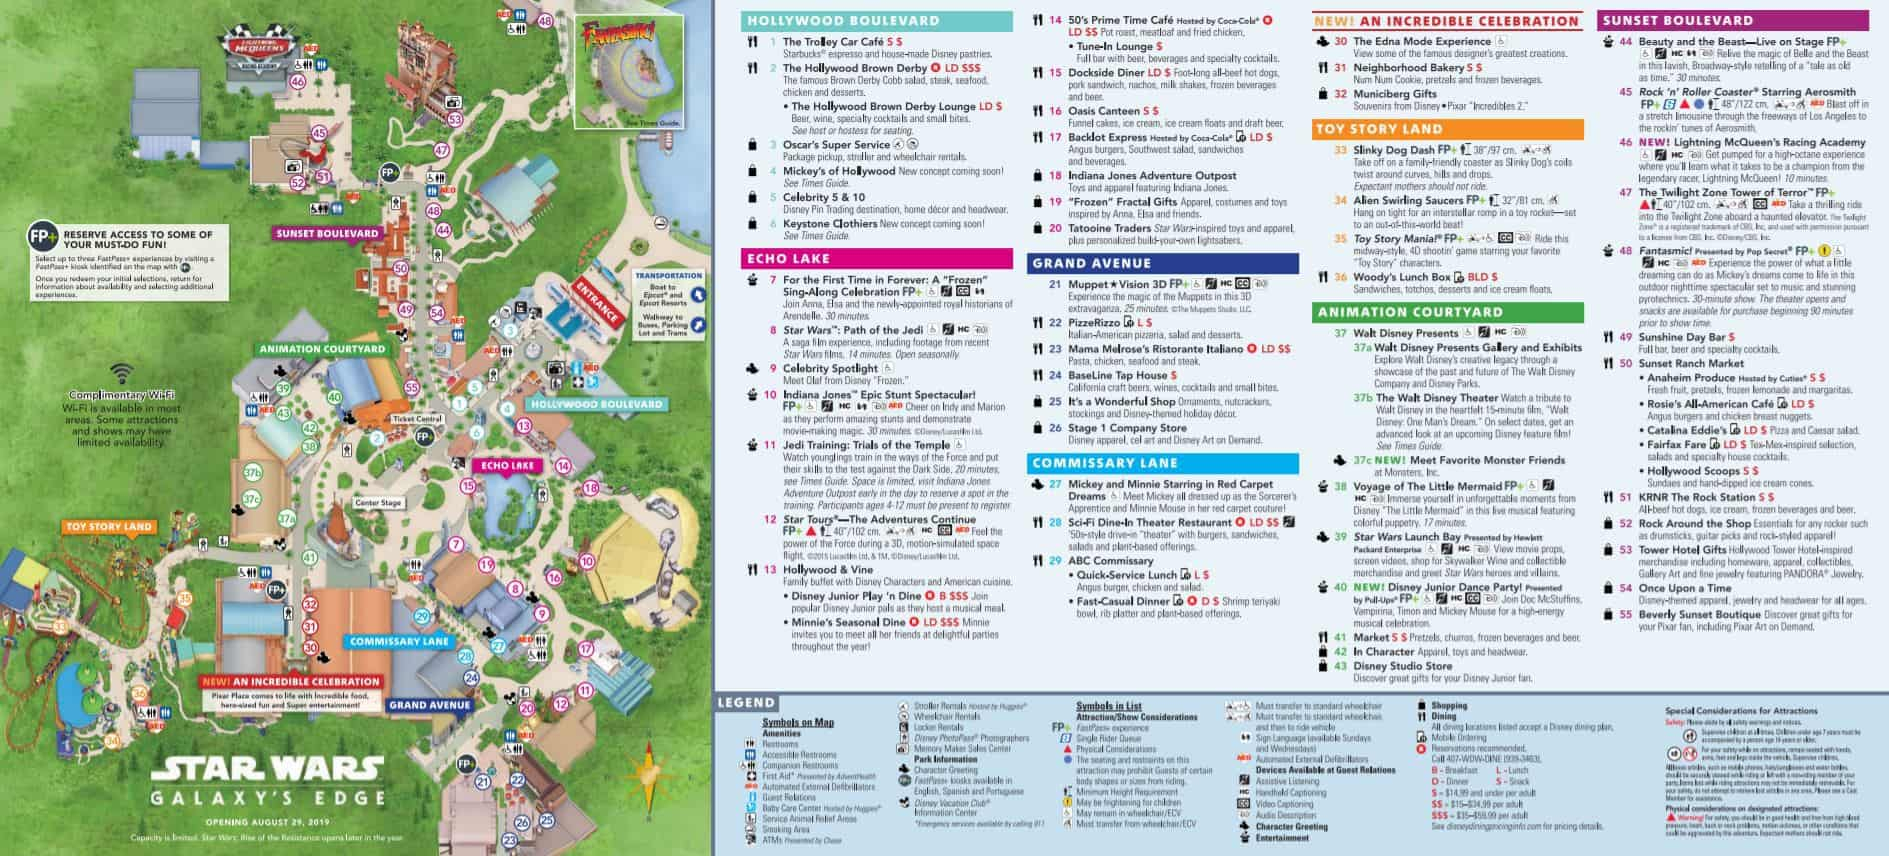 Disney World Maps - Download For The Parks, Resorts, Parties